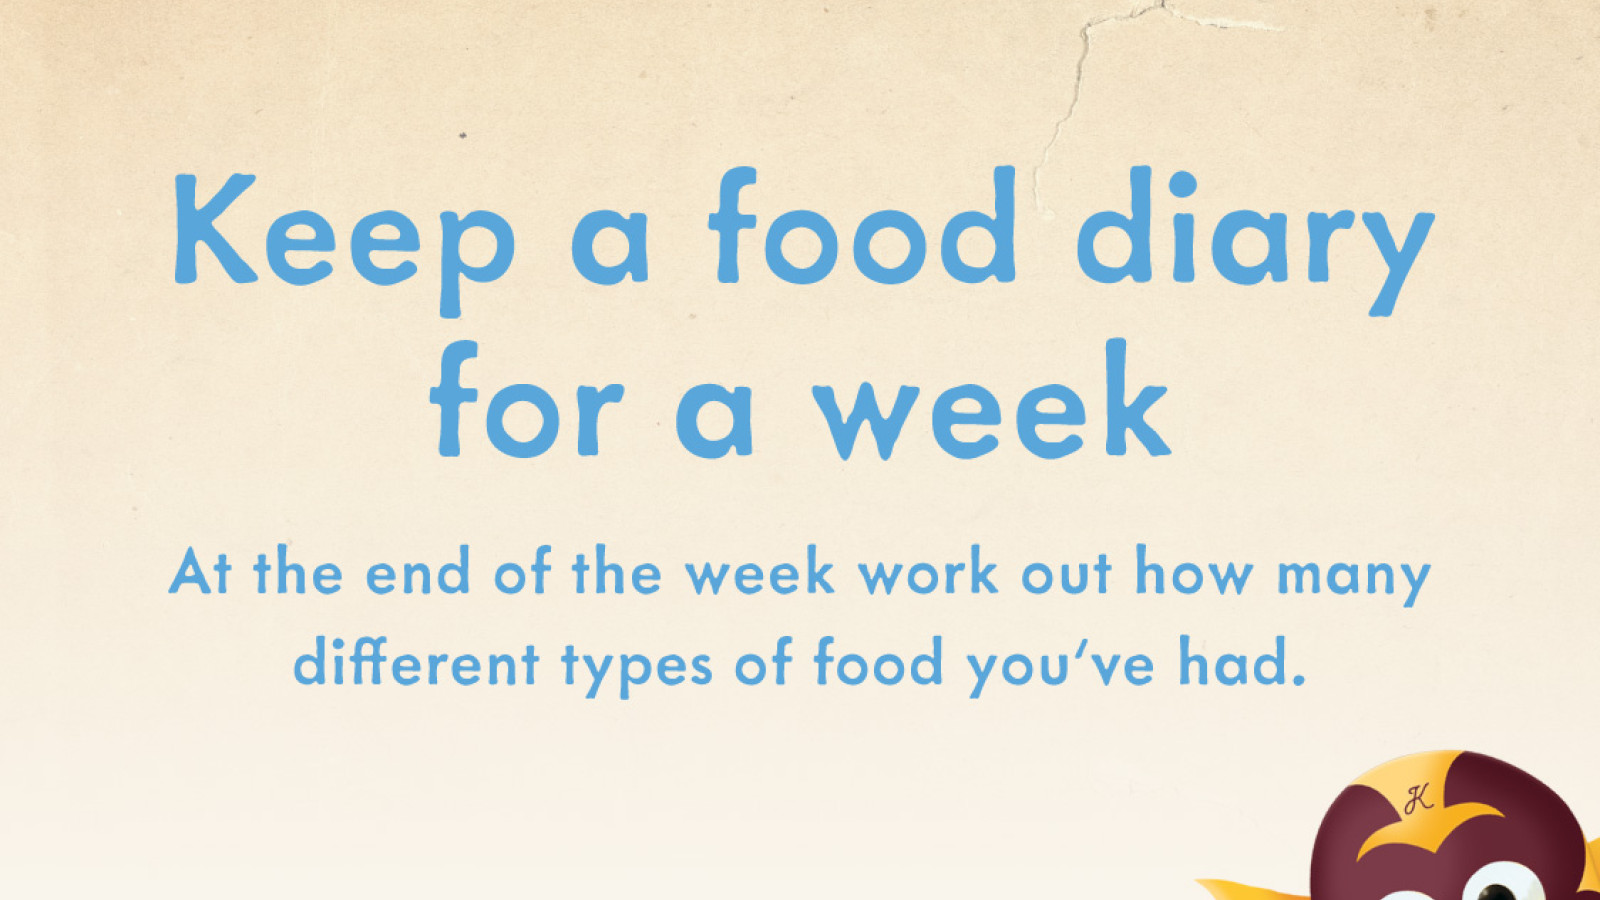 Keep a Food Diary for a Week